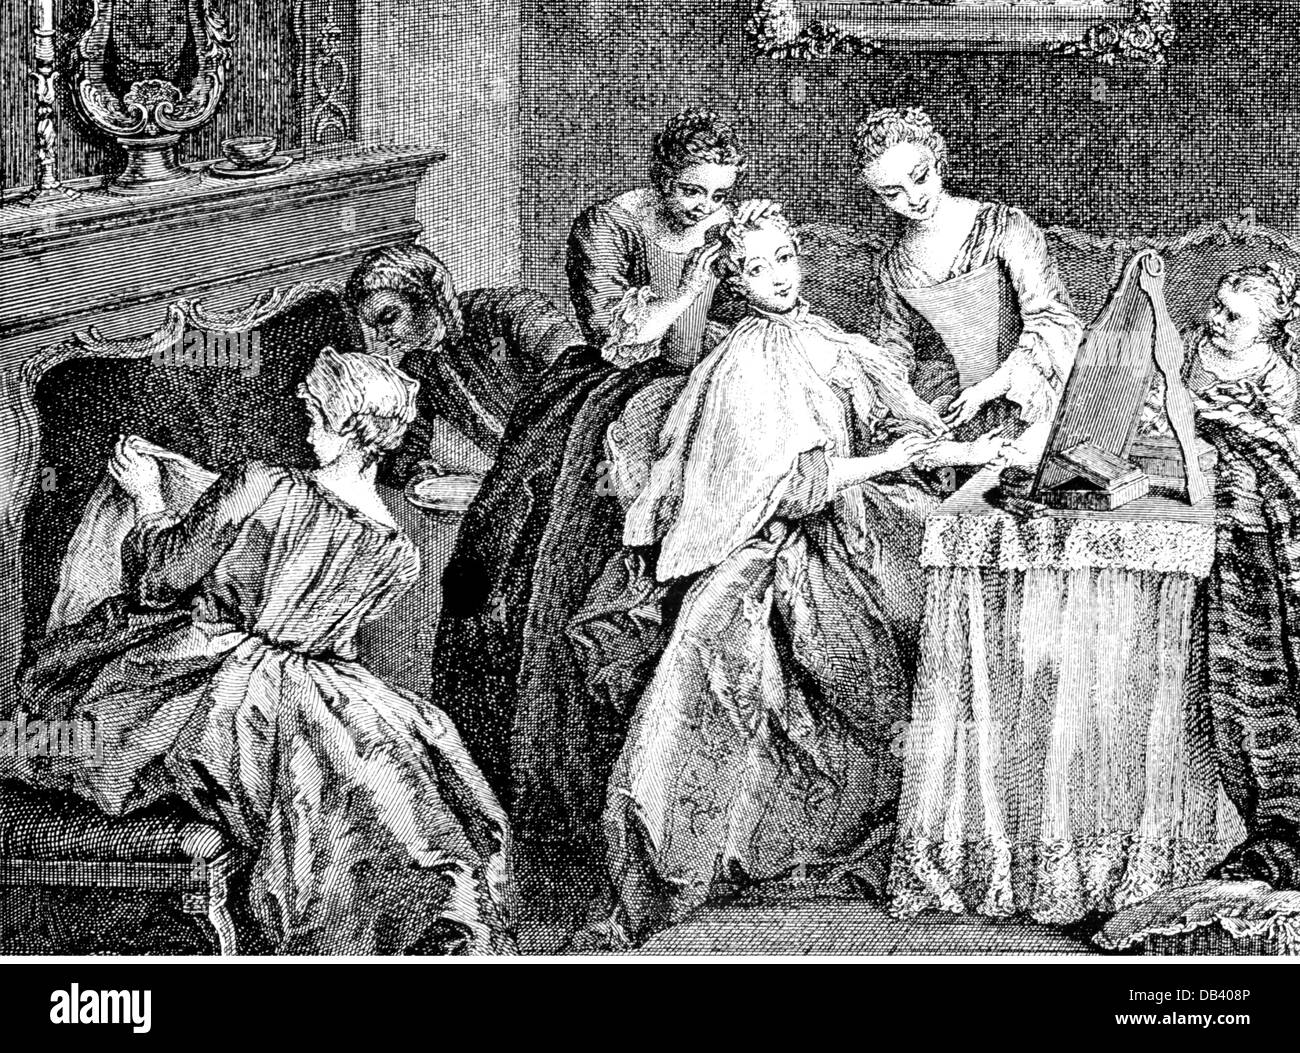 cosmetics, toilet of a lady, after painting by Jean-Baptiste Pater (1695 - 1736), copper engraving, France, 18th century, 18th century, graphic, graphics, beauty care, half length, sitting, sit, make-up table, dressing table, make-up tables, dressing tables, mirror, mirrors, cape, capes, hair, hair style, hairstyle, hairdo, haircut, hair styles, hairstyles, haircuts, hair care, maidservant, make oneself up, making up, make up, Jean - Baptiste, cosmetics, cosmetic, lady, ladies, historic, historical, woman, women, female, people, Artist's Copyright has not to be cleared Stock Photo